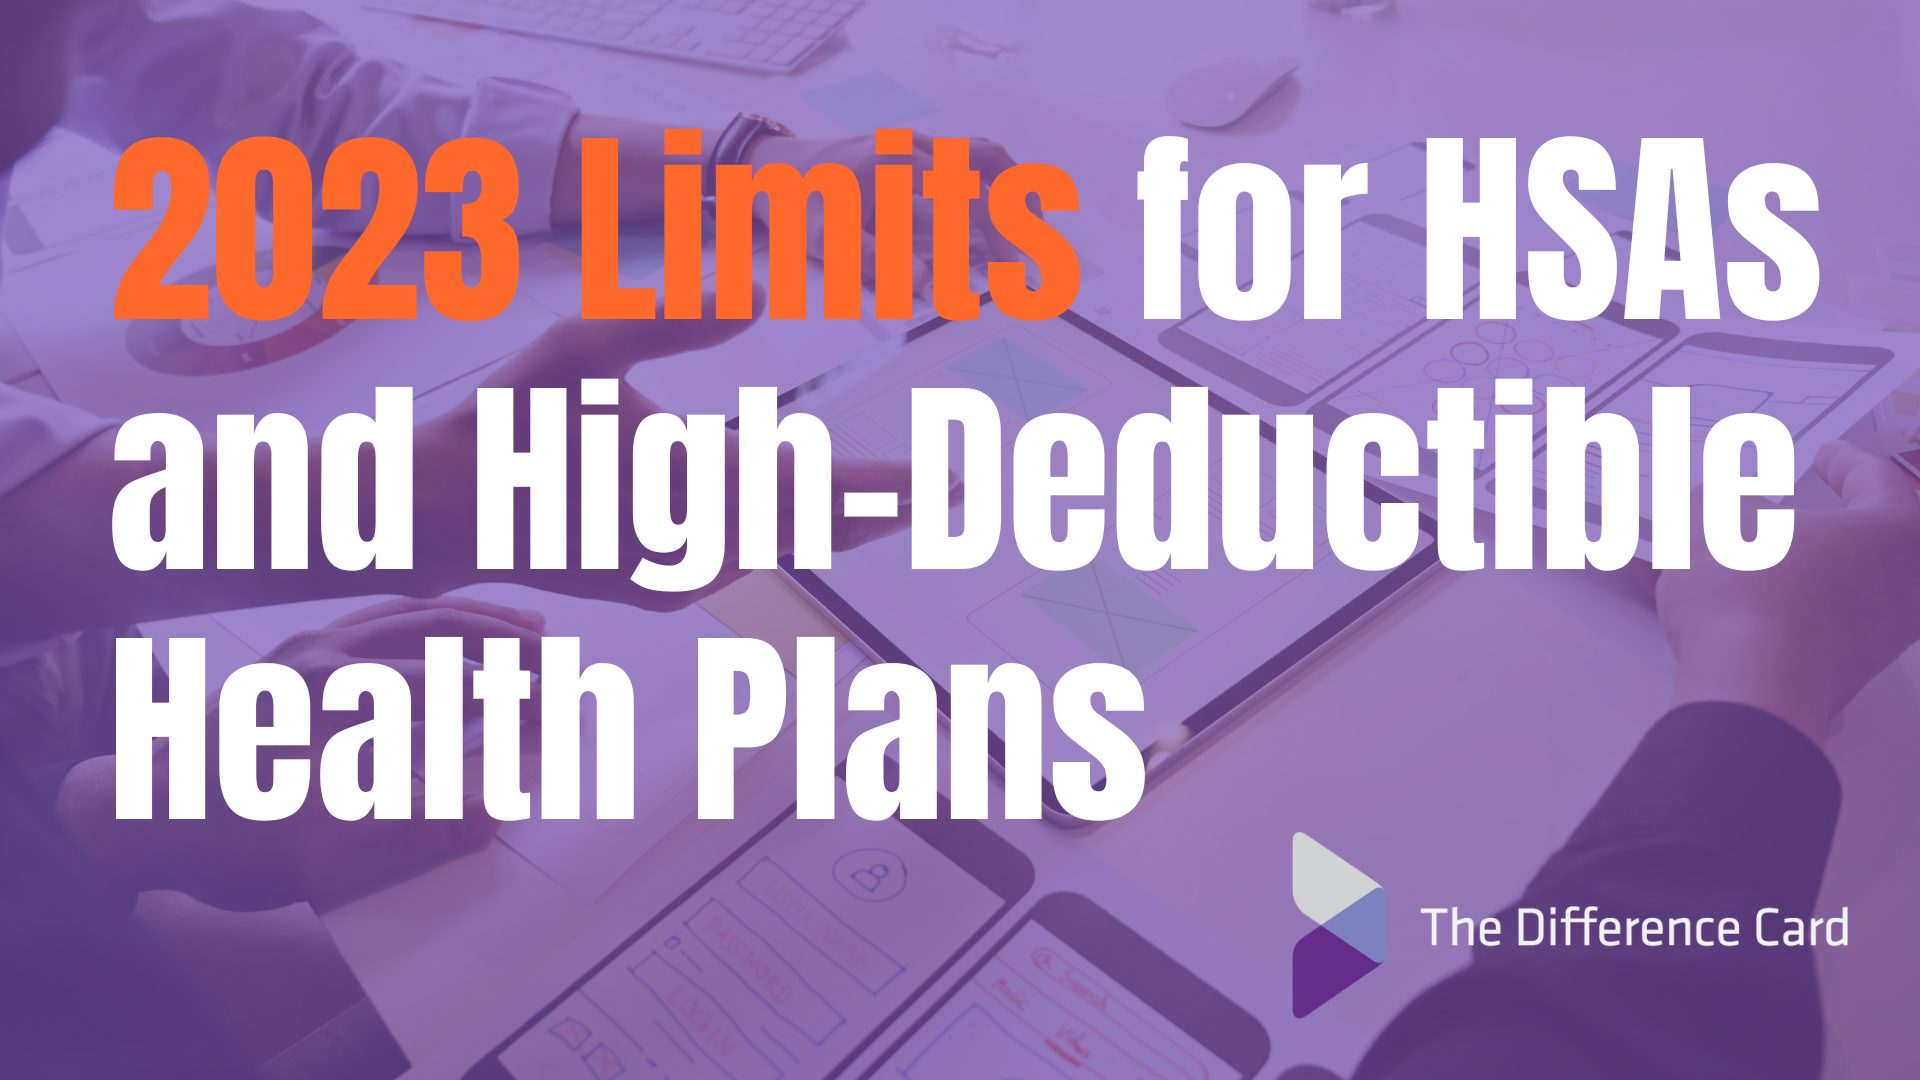 What are the 2023 Limits for HSAs and HDHPs? Learn More